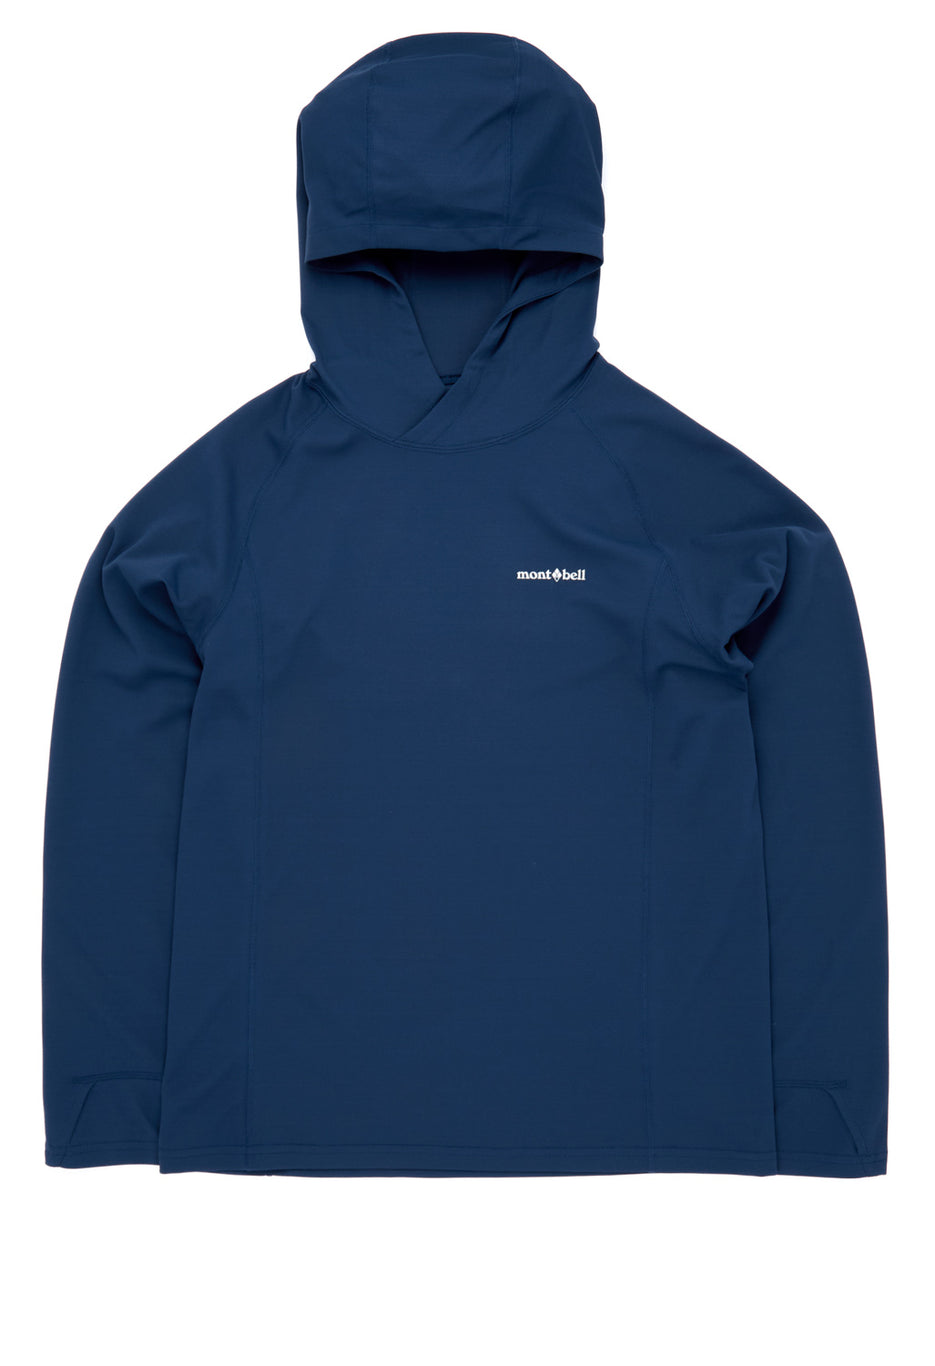 Montbell Men's UV Protection Hoodie - Navy